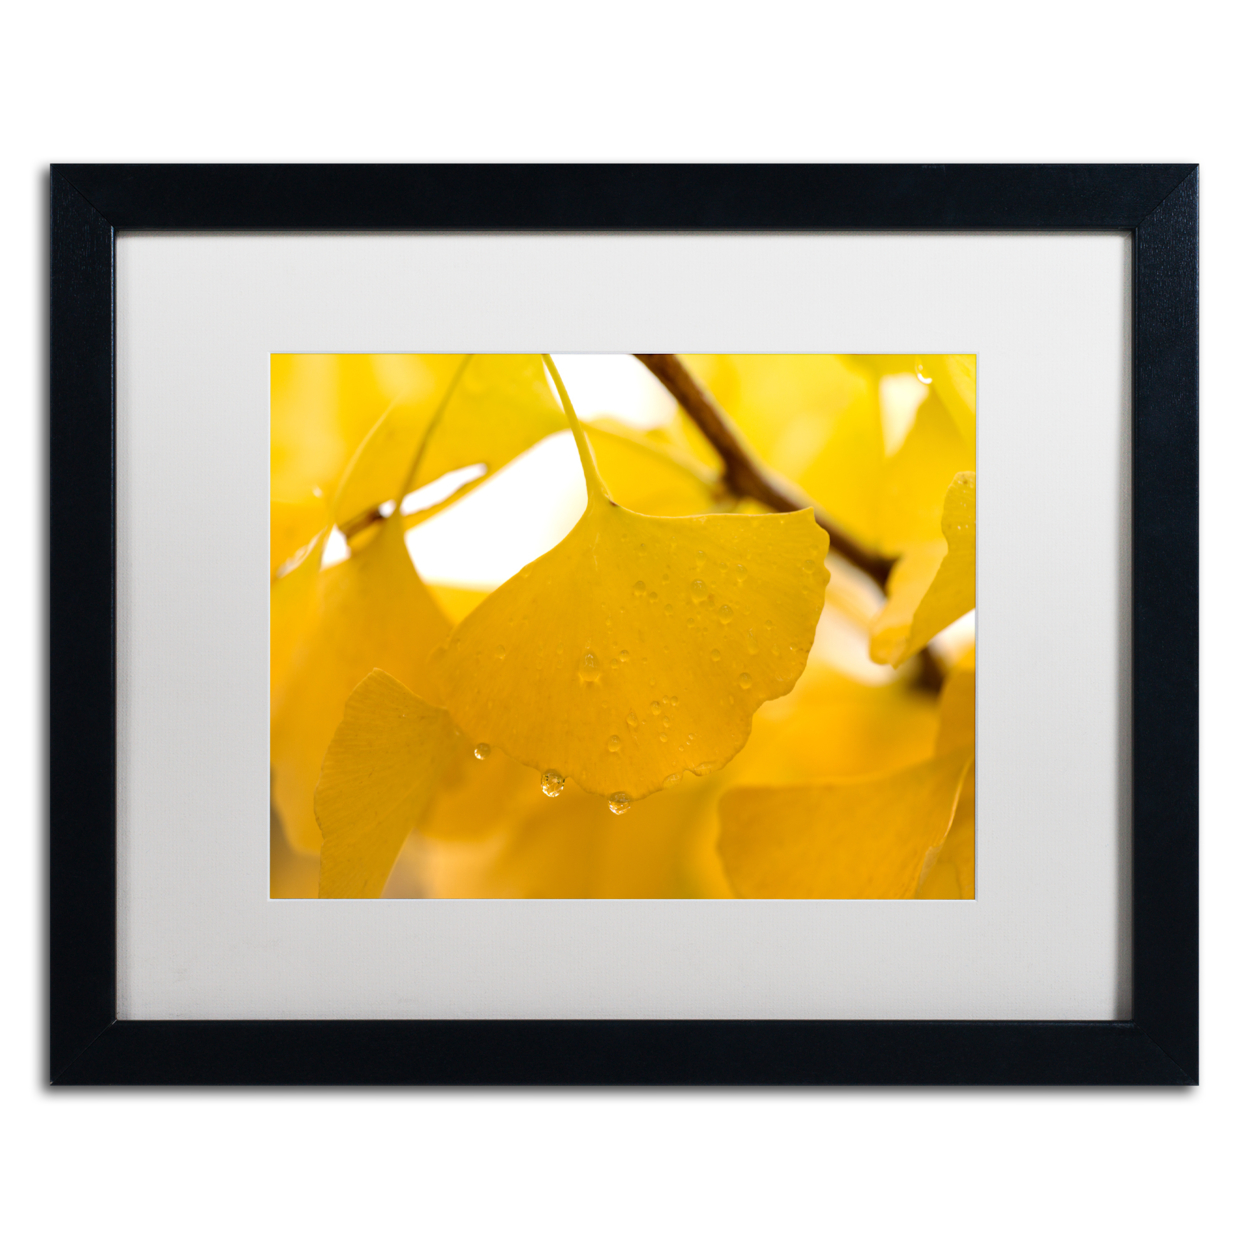 Philippe Sainte-Laudy 'Ginkgo Drops' Black Wooden Framed Art 18 X 22 Inches